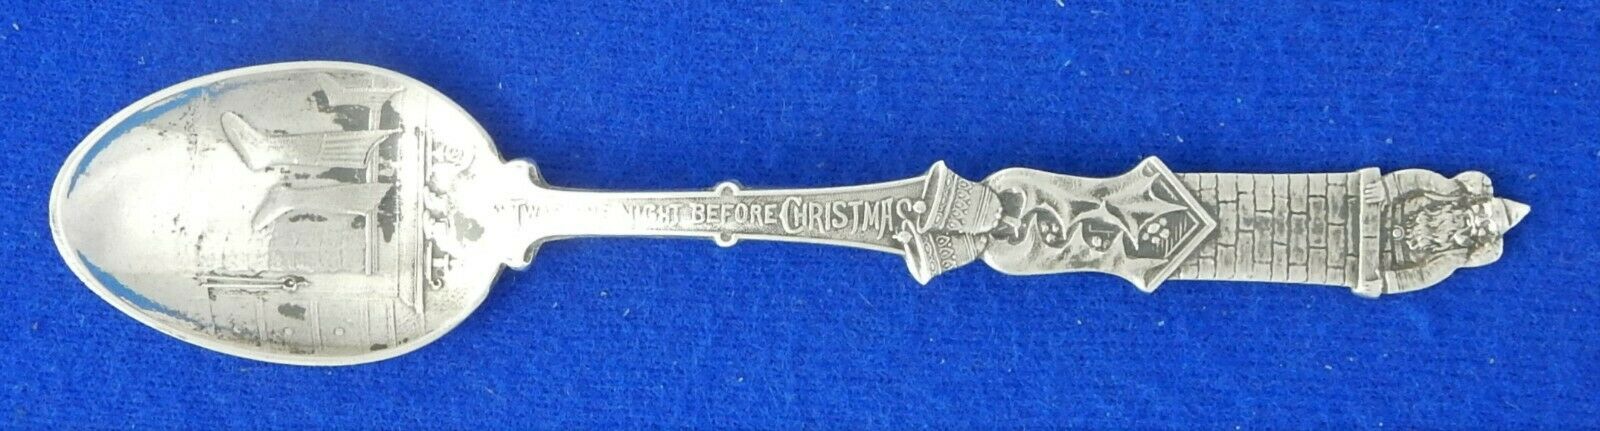 The Night Before Christmas Gorham Sterling Silver Souvenir Spoon 4 1/4